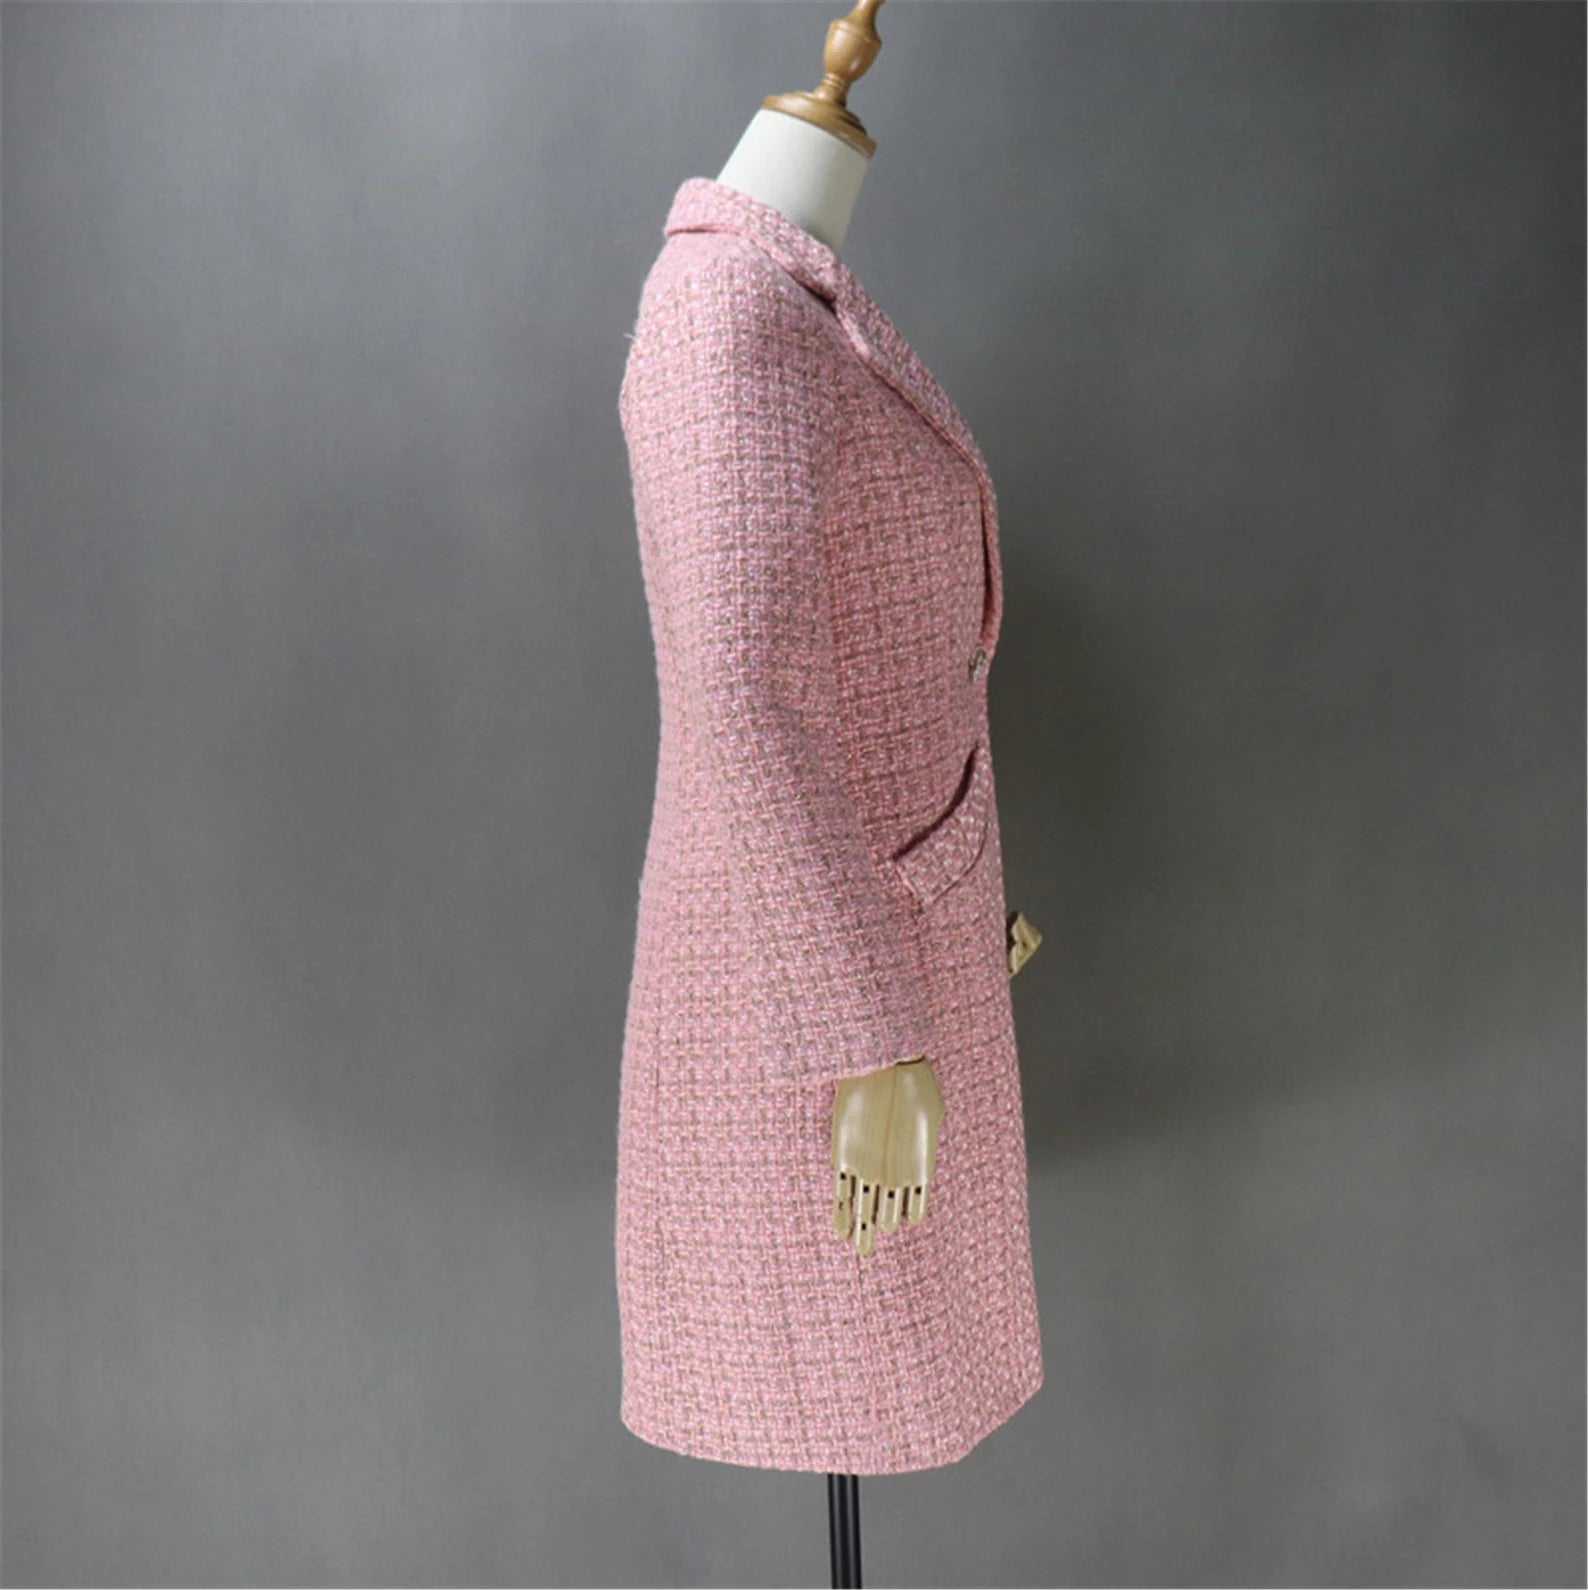 Sheath Dress  + Long Coat For Ladies With Tweed material(10% discount)  "More Than 10% Additional Discount when you buy both  Jacket  +Sheath Dress  UK CUSTOMER SERVICE! Women Custom  Hand Made Pink Tweed Blazer (more than 10% discount) - Whether it's for a wedding, an office interview, graduation, the Inauguration, or a new job, make a lasting impression in a timeless tweed suit.